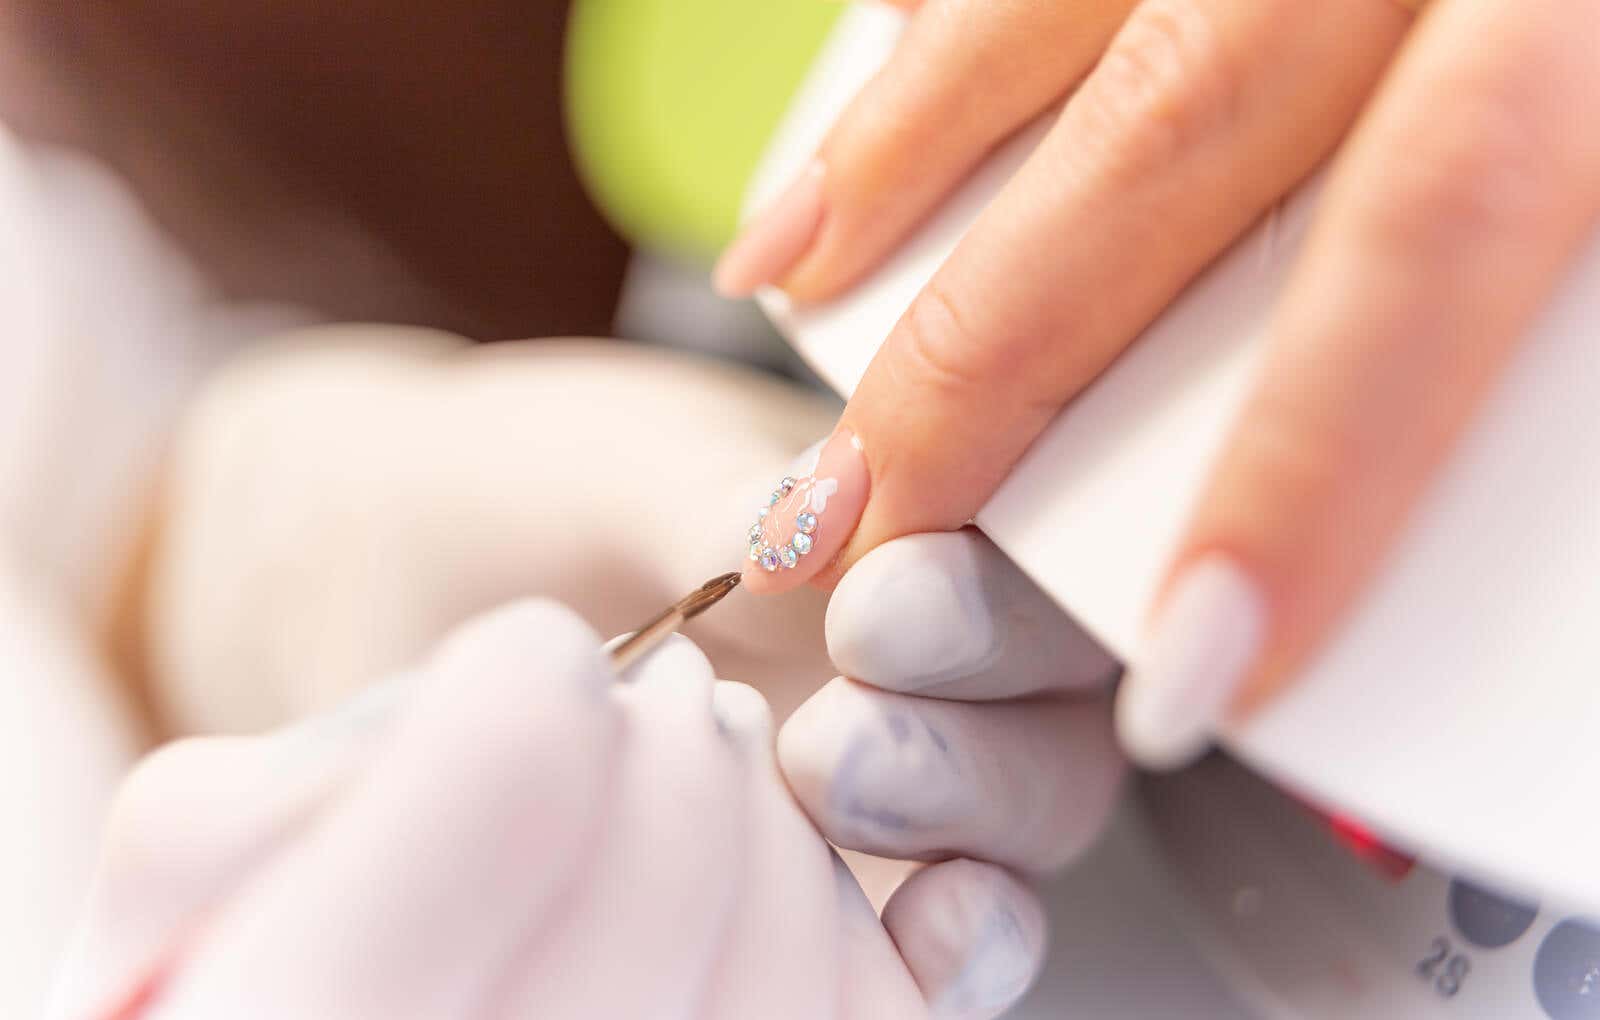 how to clean nail brushes